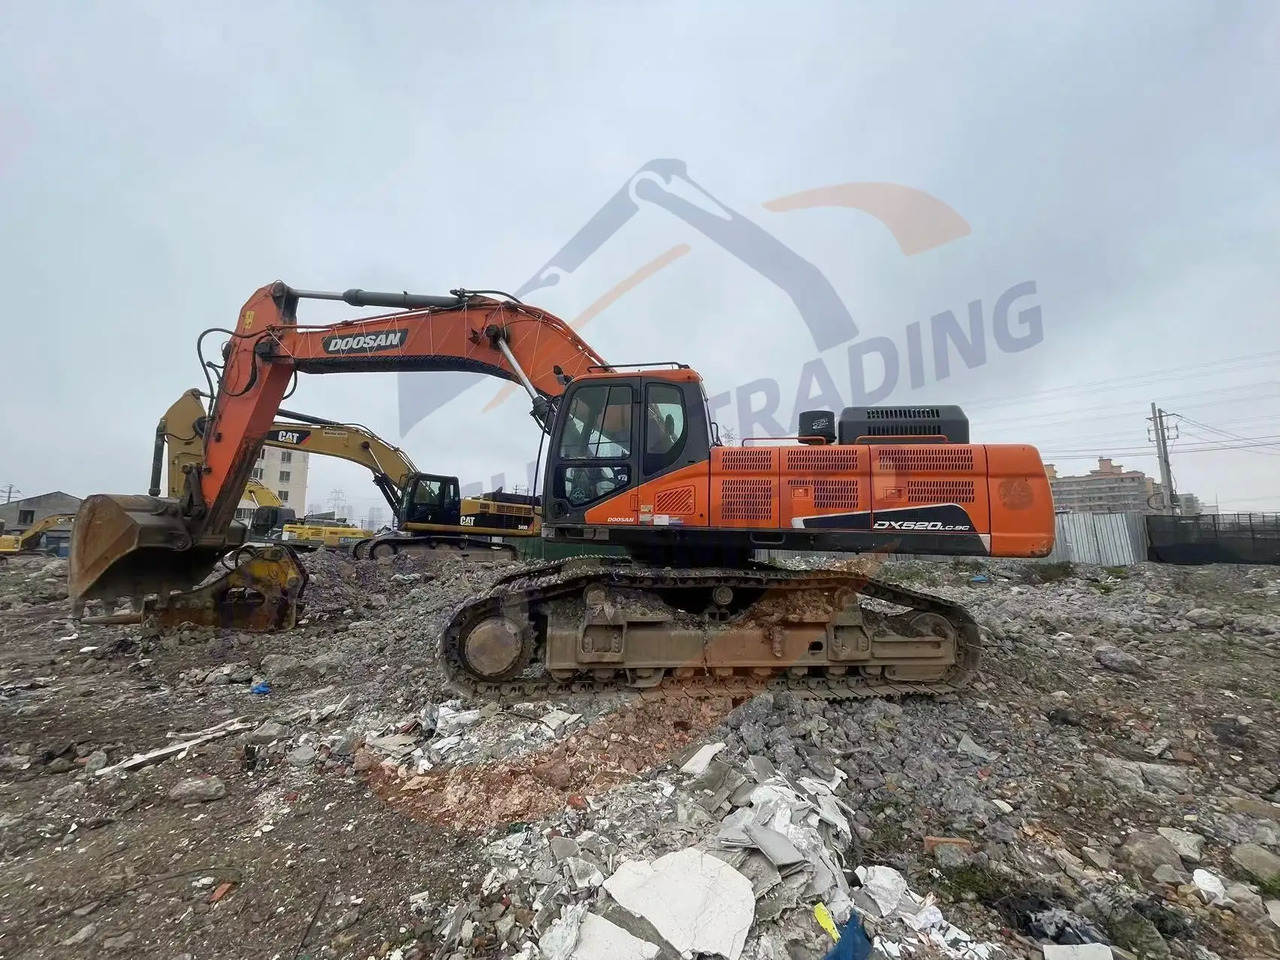 Máy xúc bánh xích new arrival Used Doosan excavator DX520LC-9C in good condition for sale in good condition: hình 6